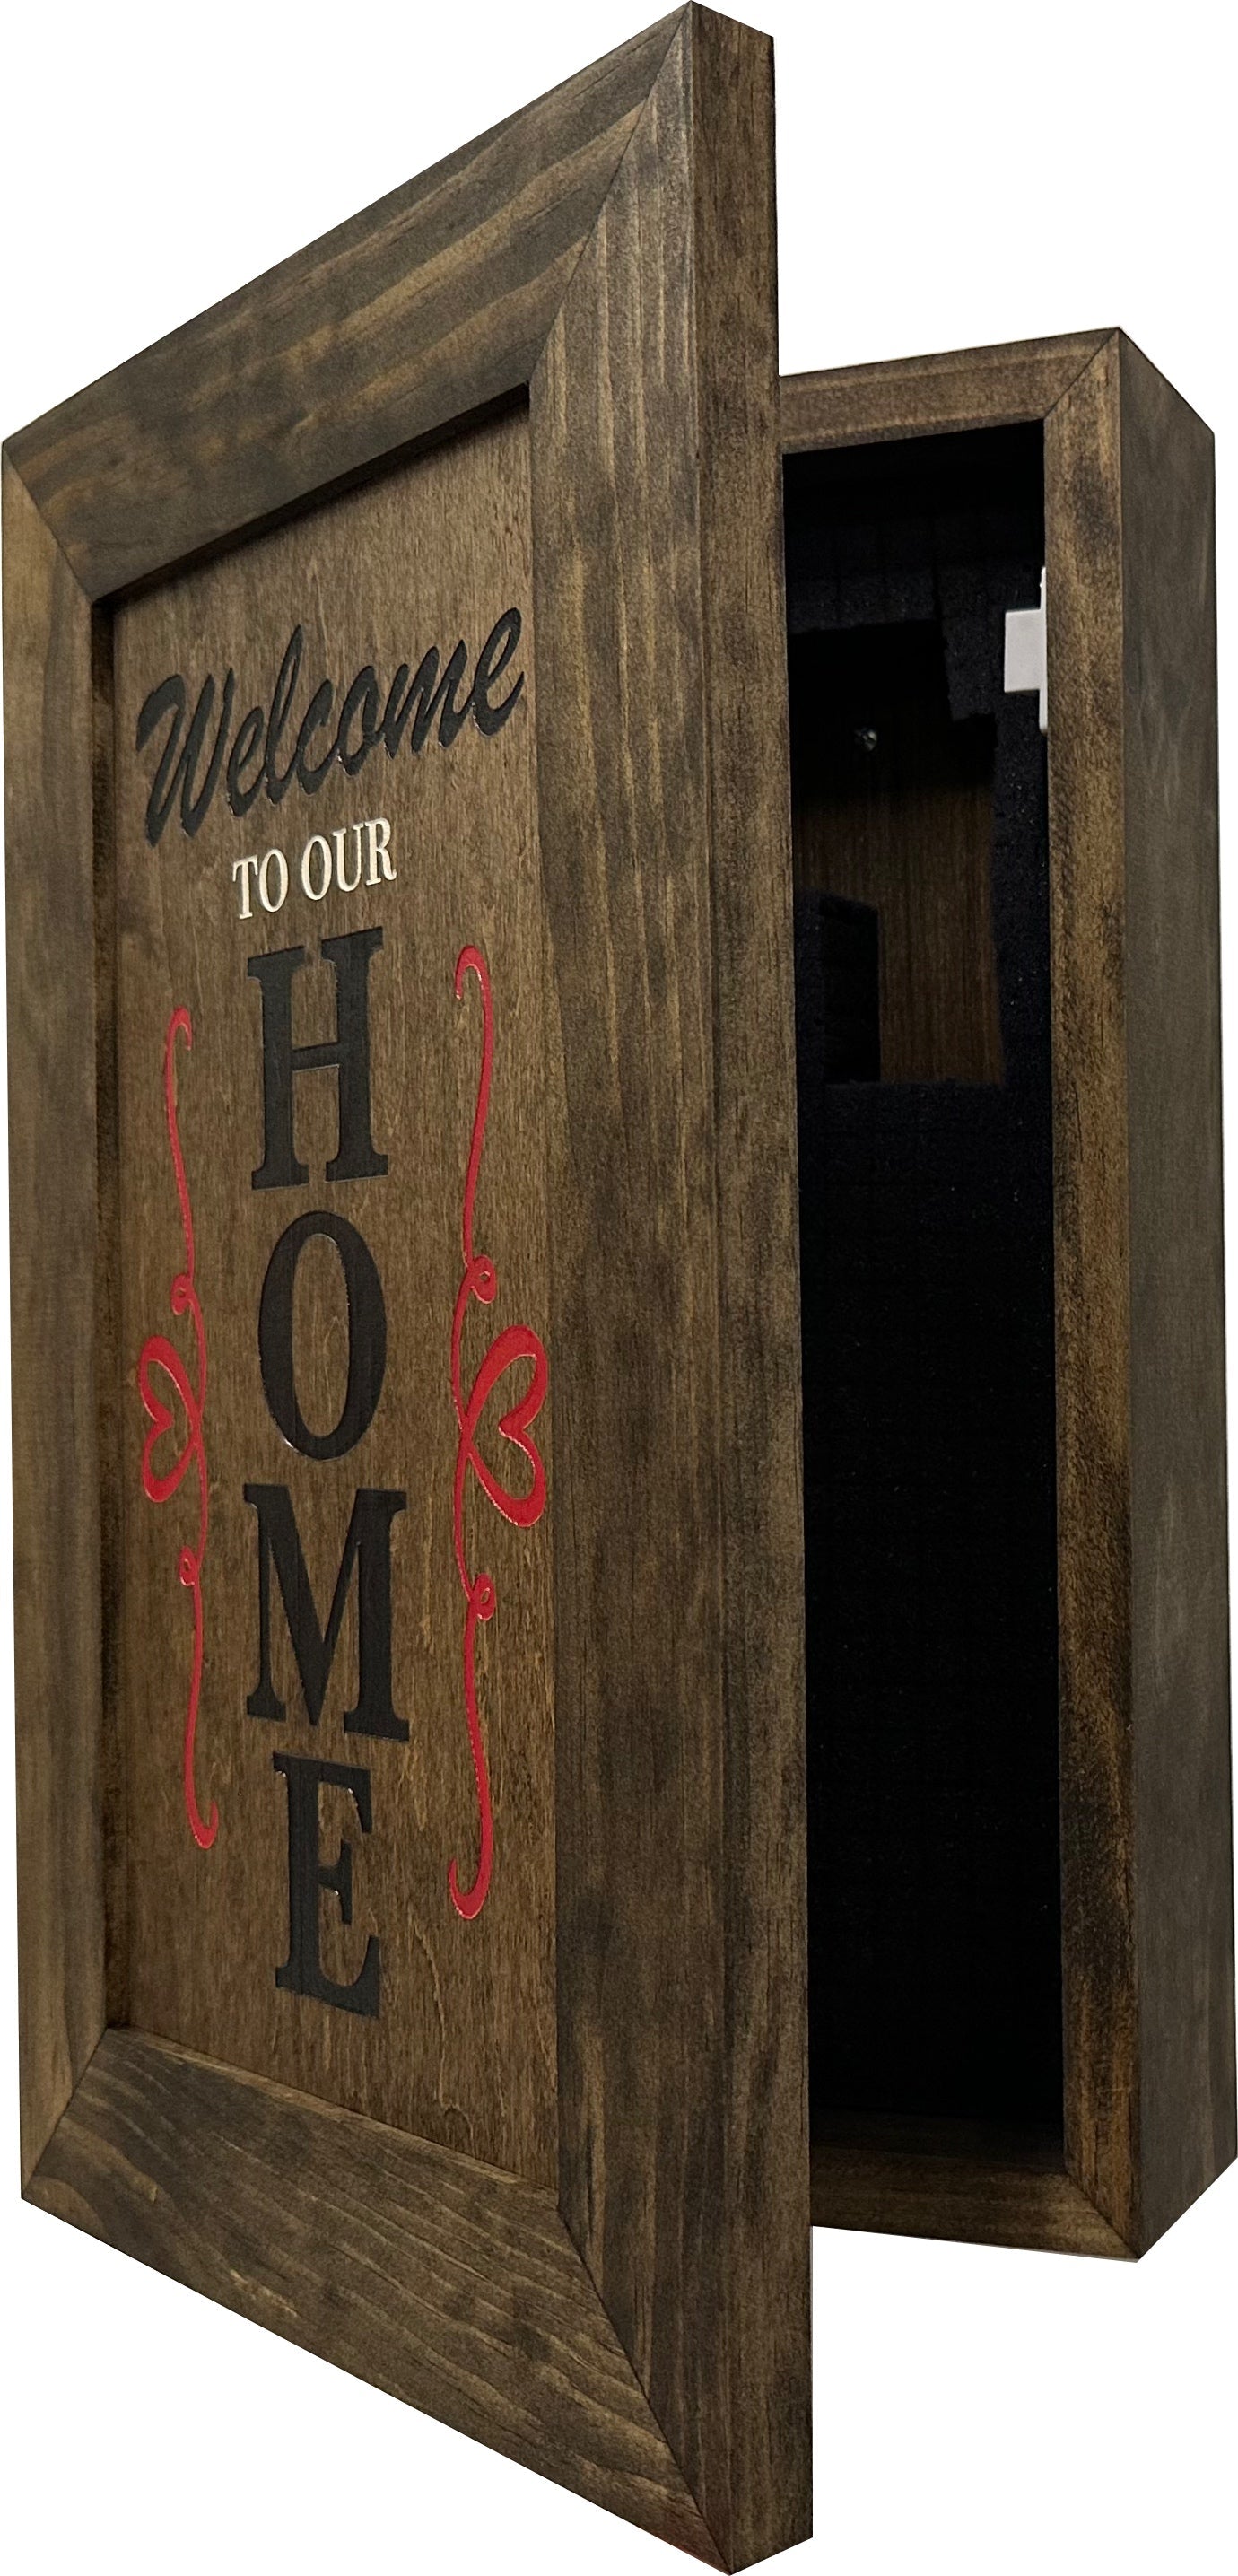 Wooden Secure Gun Safe Welcome to our Home Wall Decor (Jacobean)